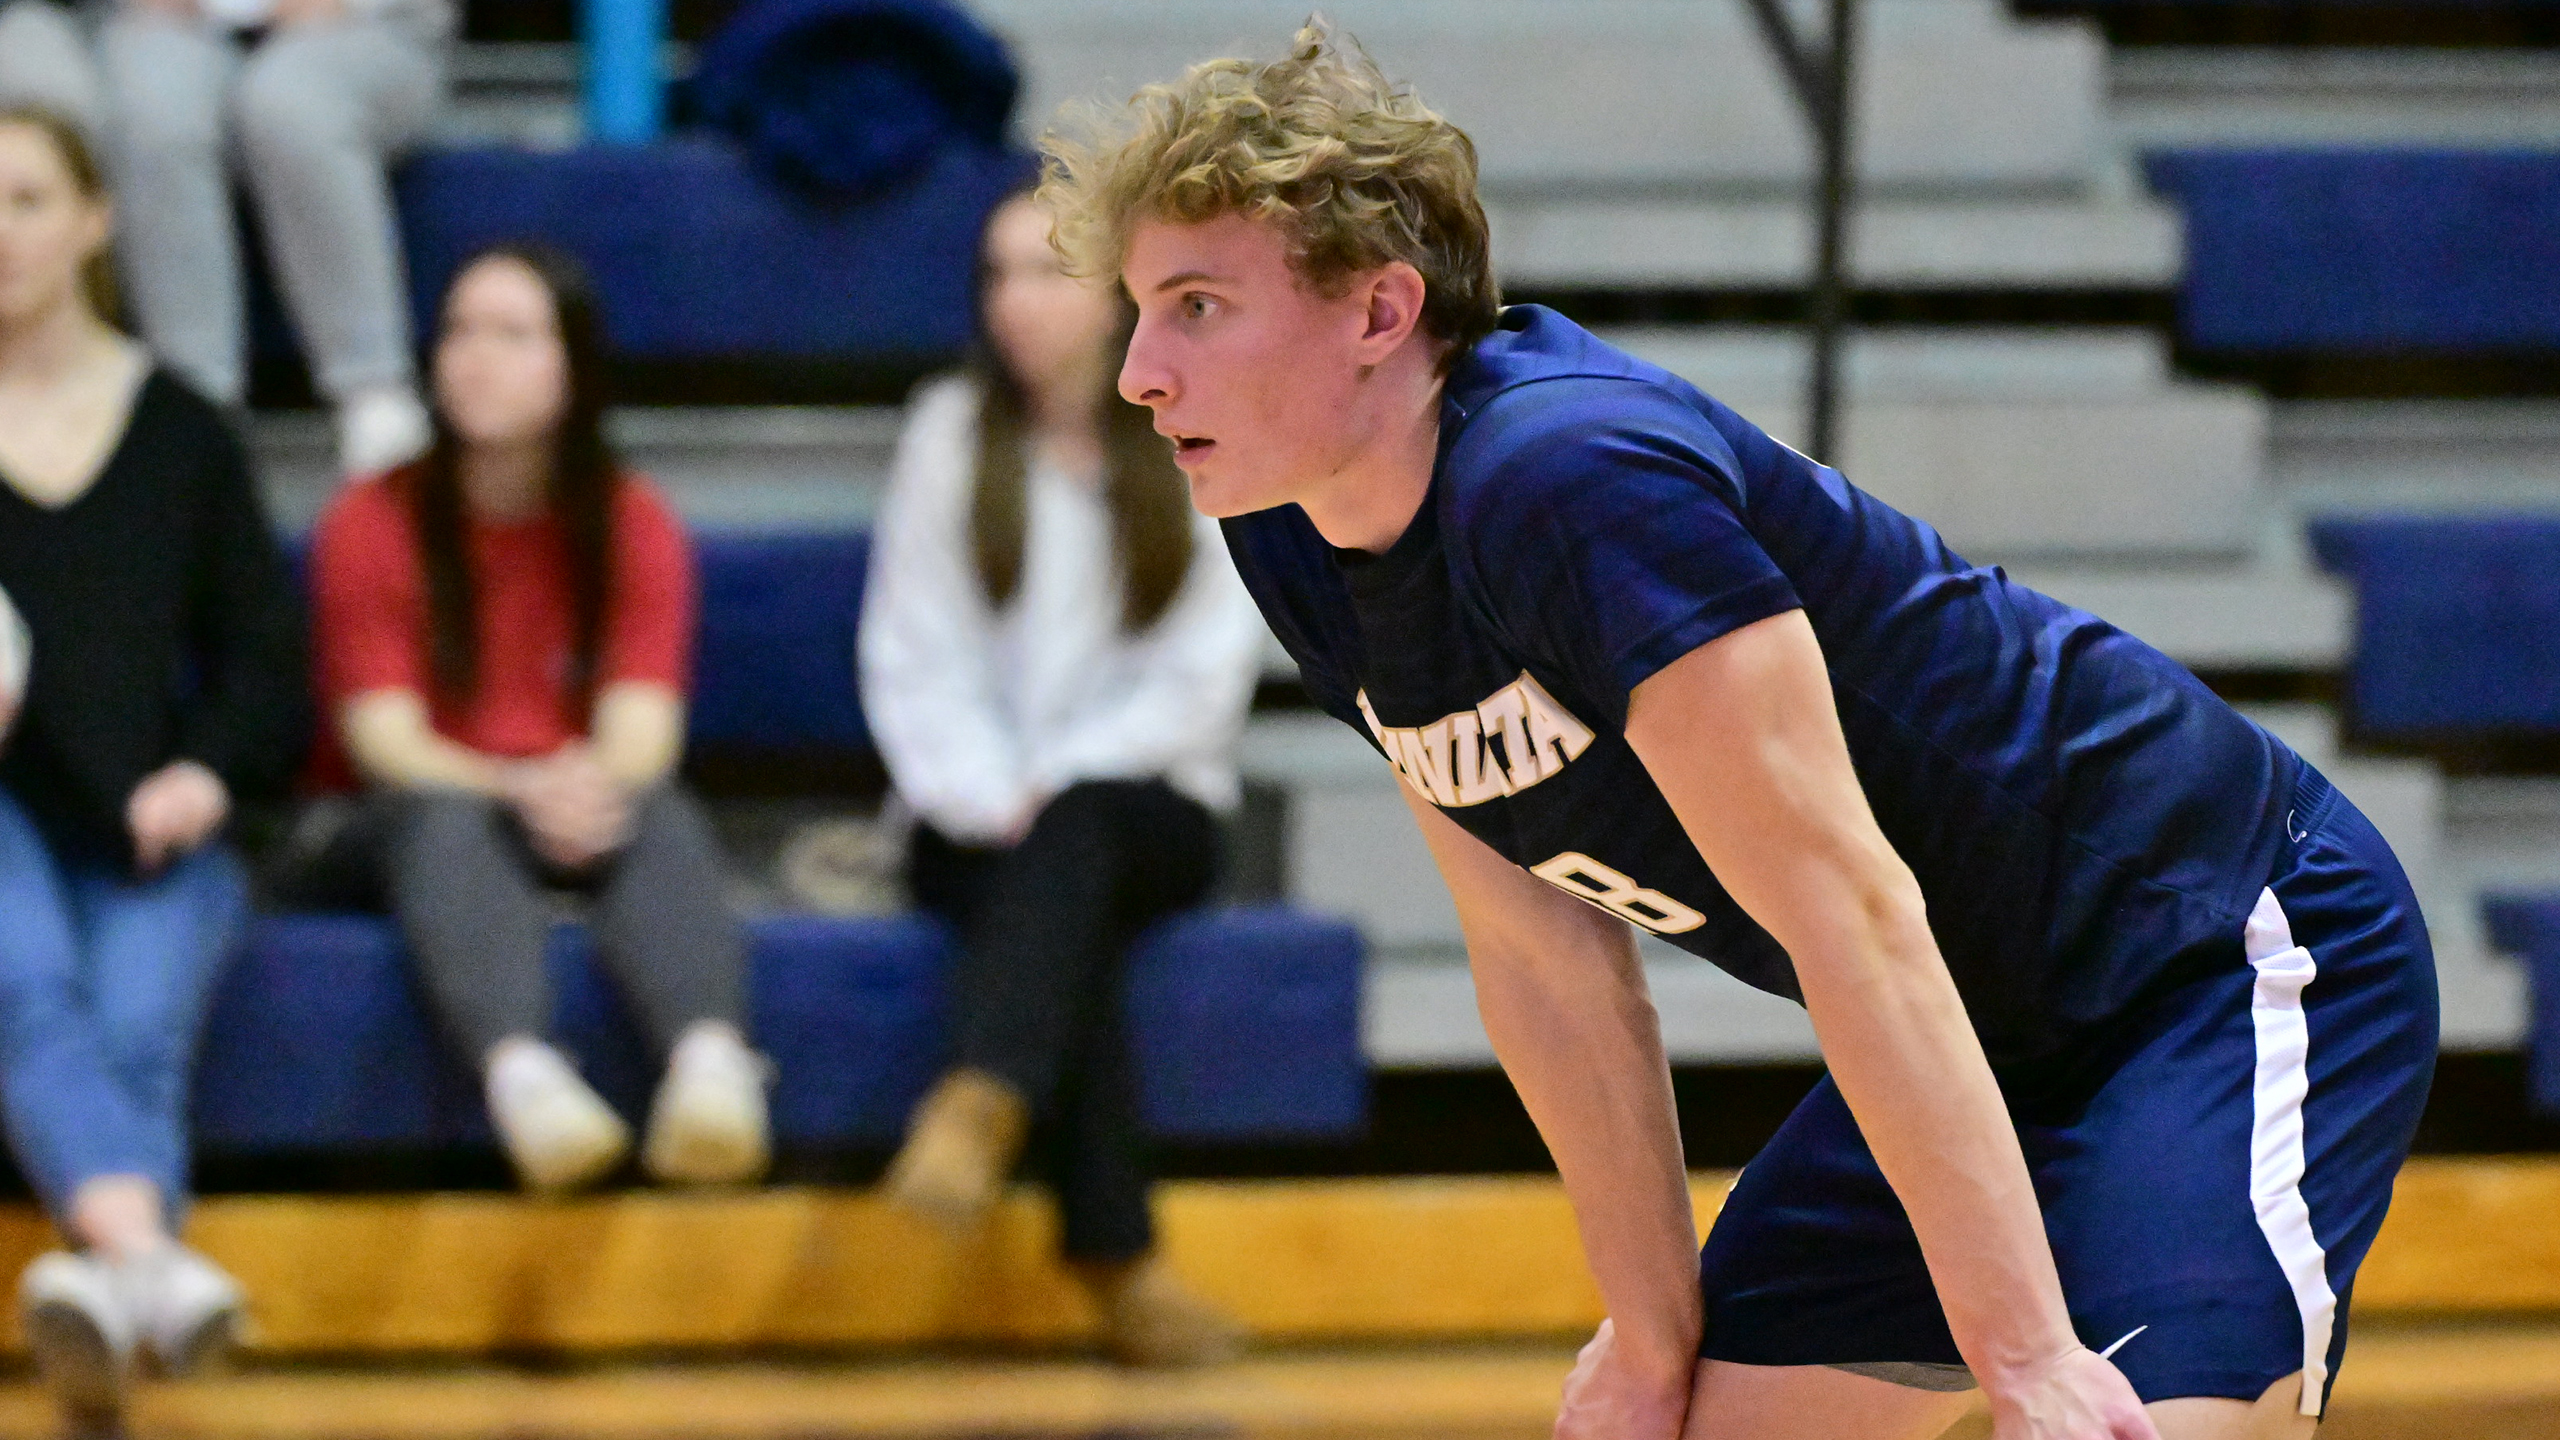 Men's Volleyball Pushes Winning Streak to 11 With Wins over Virginia Wesleyan and Calvin